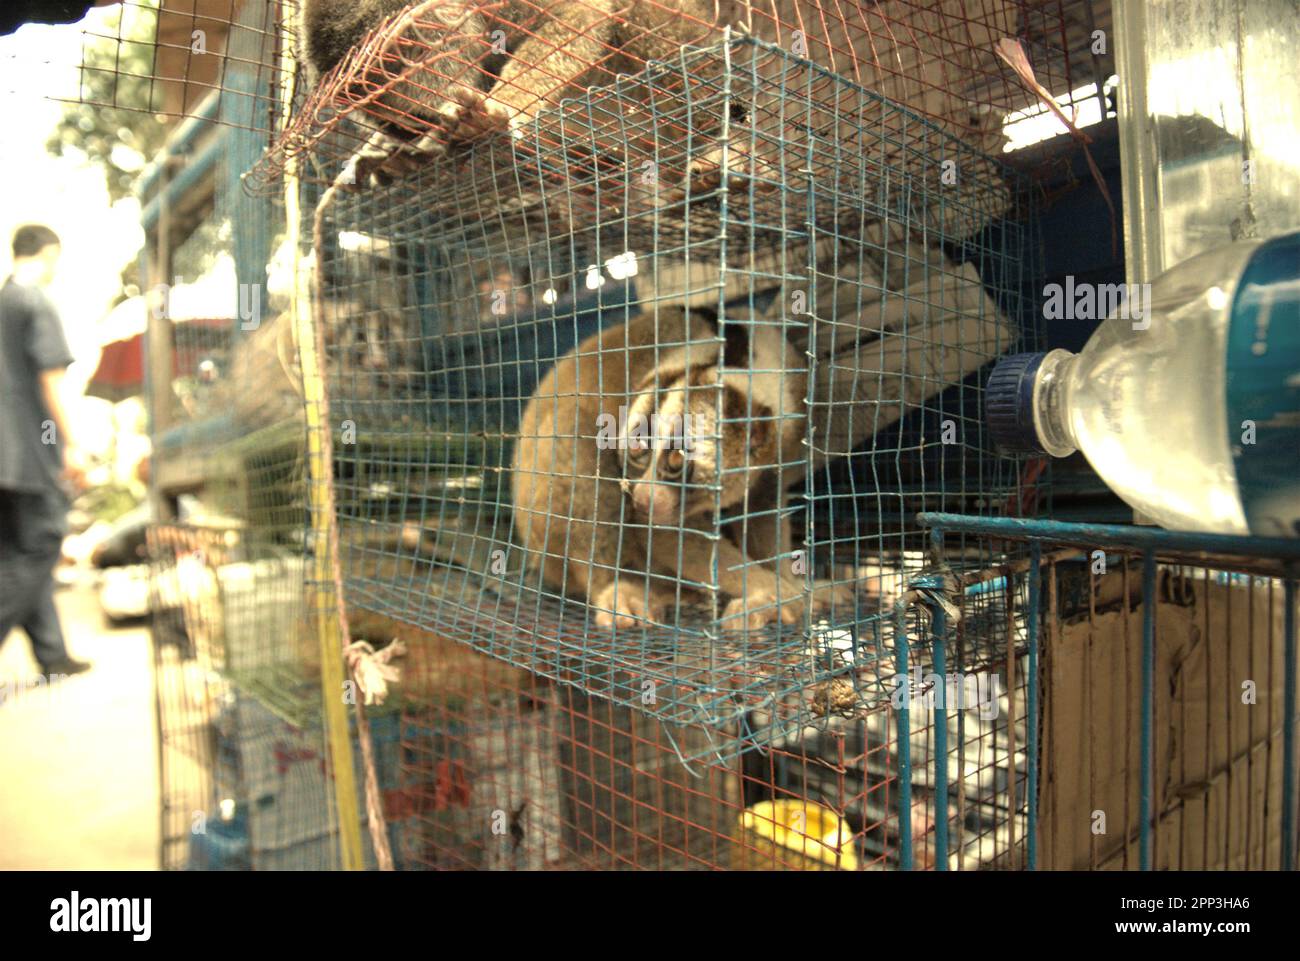 A roadside animal vendor near an animal market that also sells wildlife and protected species, including slow loris (pictured), in Jatinegara, East Jakarta, Jakarta, Indonesia. Despite its protection, slow loris has been suffering from wildlife trade. The nocturnal primate species is treated as pet while not having characteristics to survive in anthropogenic settings. Moreover, the species is quite popular on social media. Stock Photo